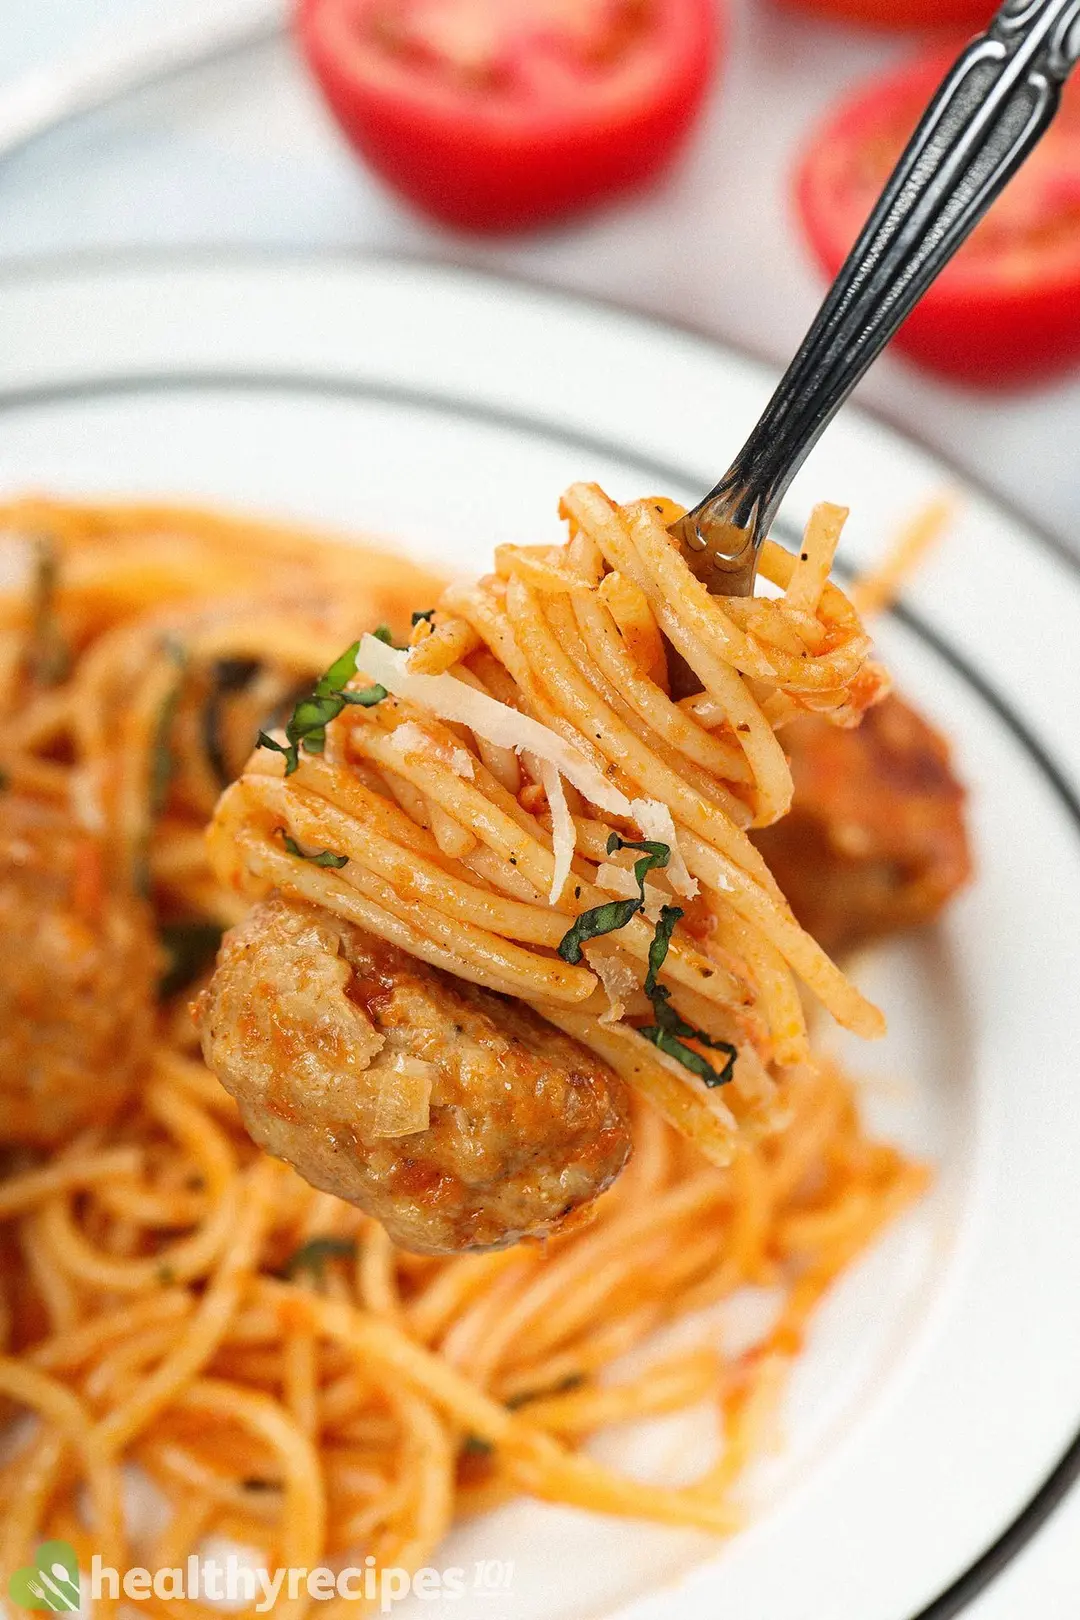 A chicken meatball with spaghetti on a fork